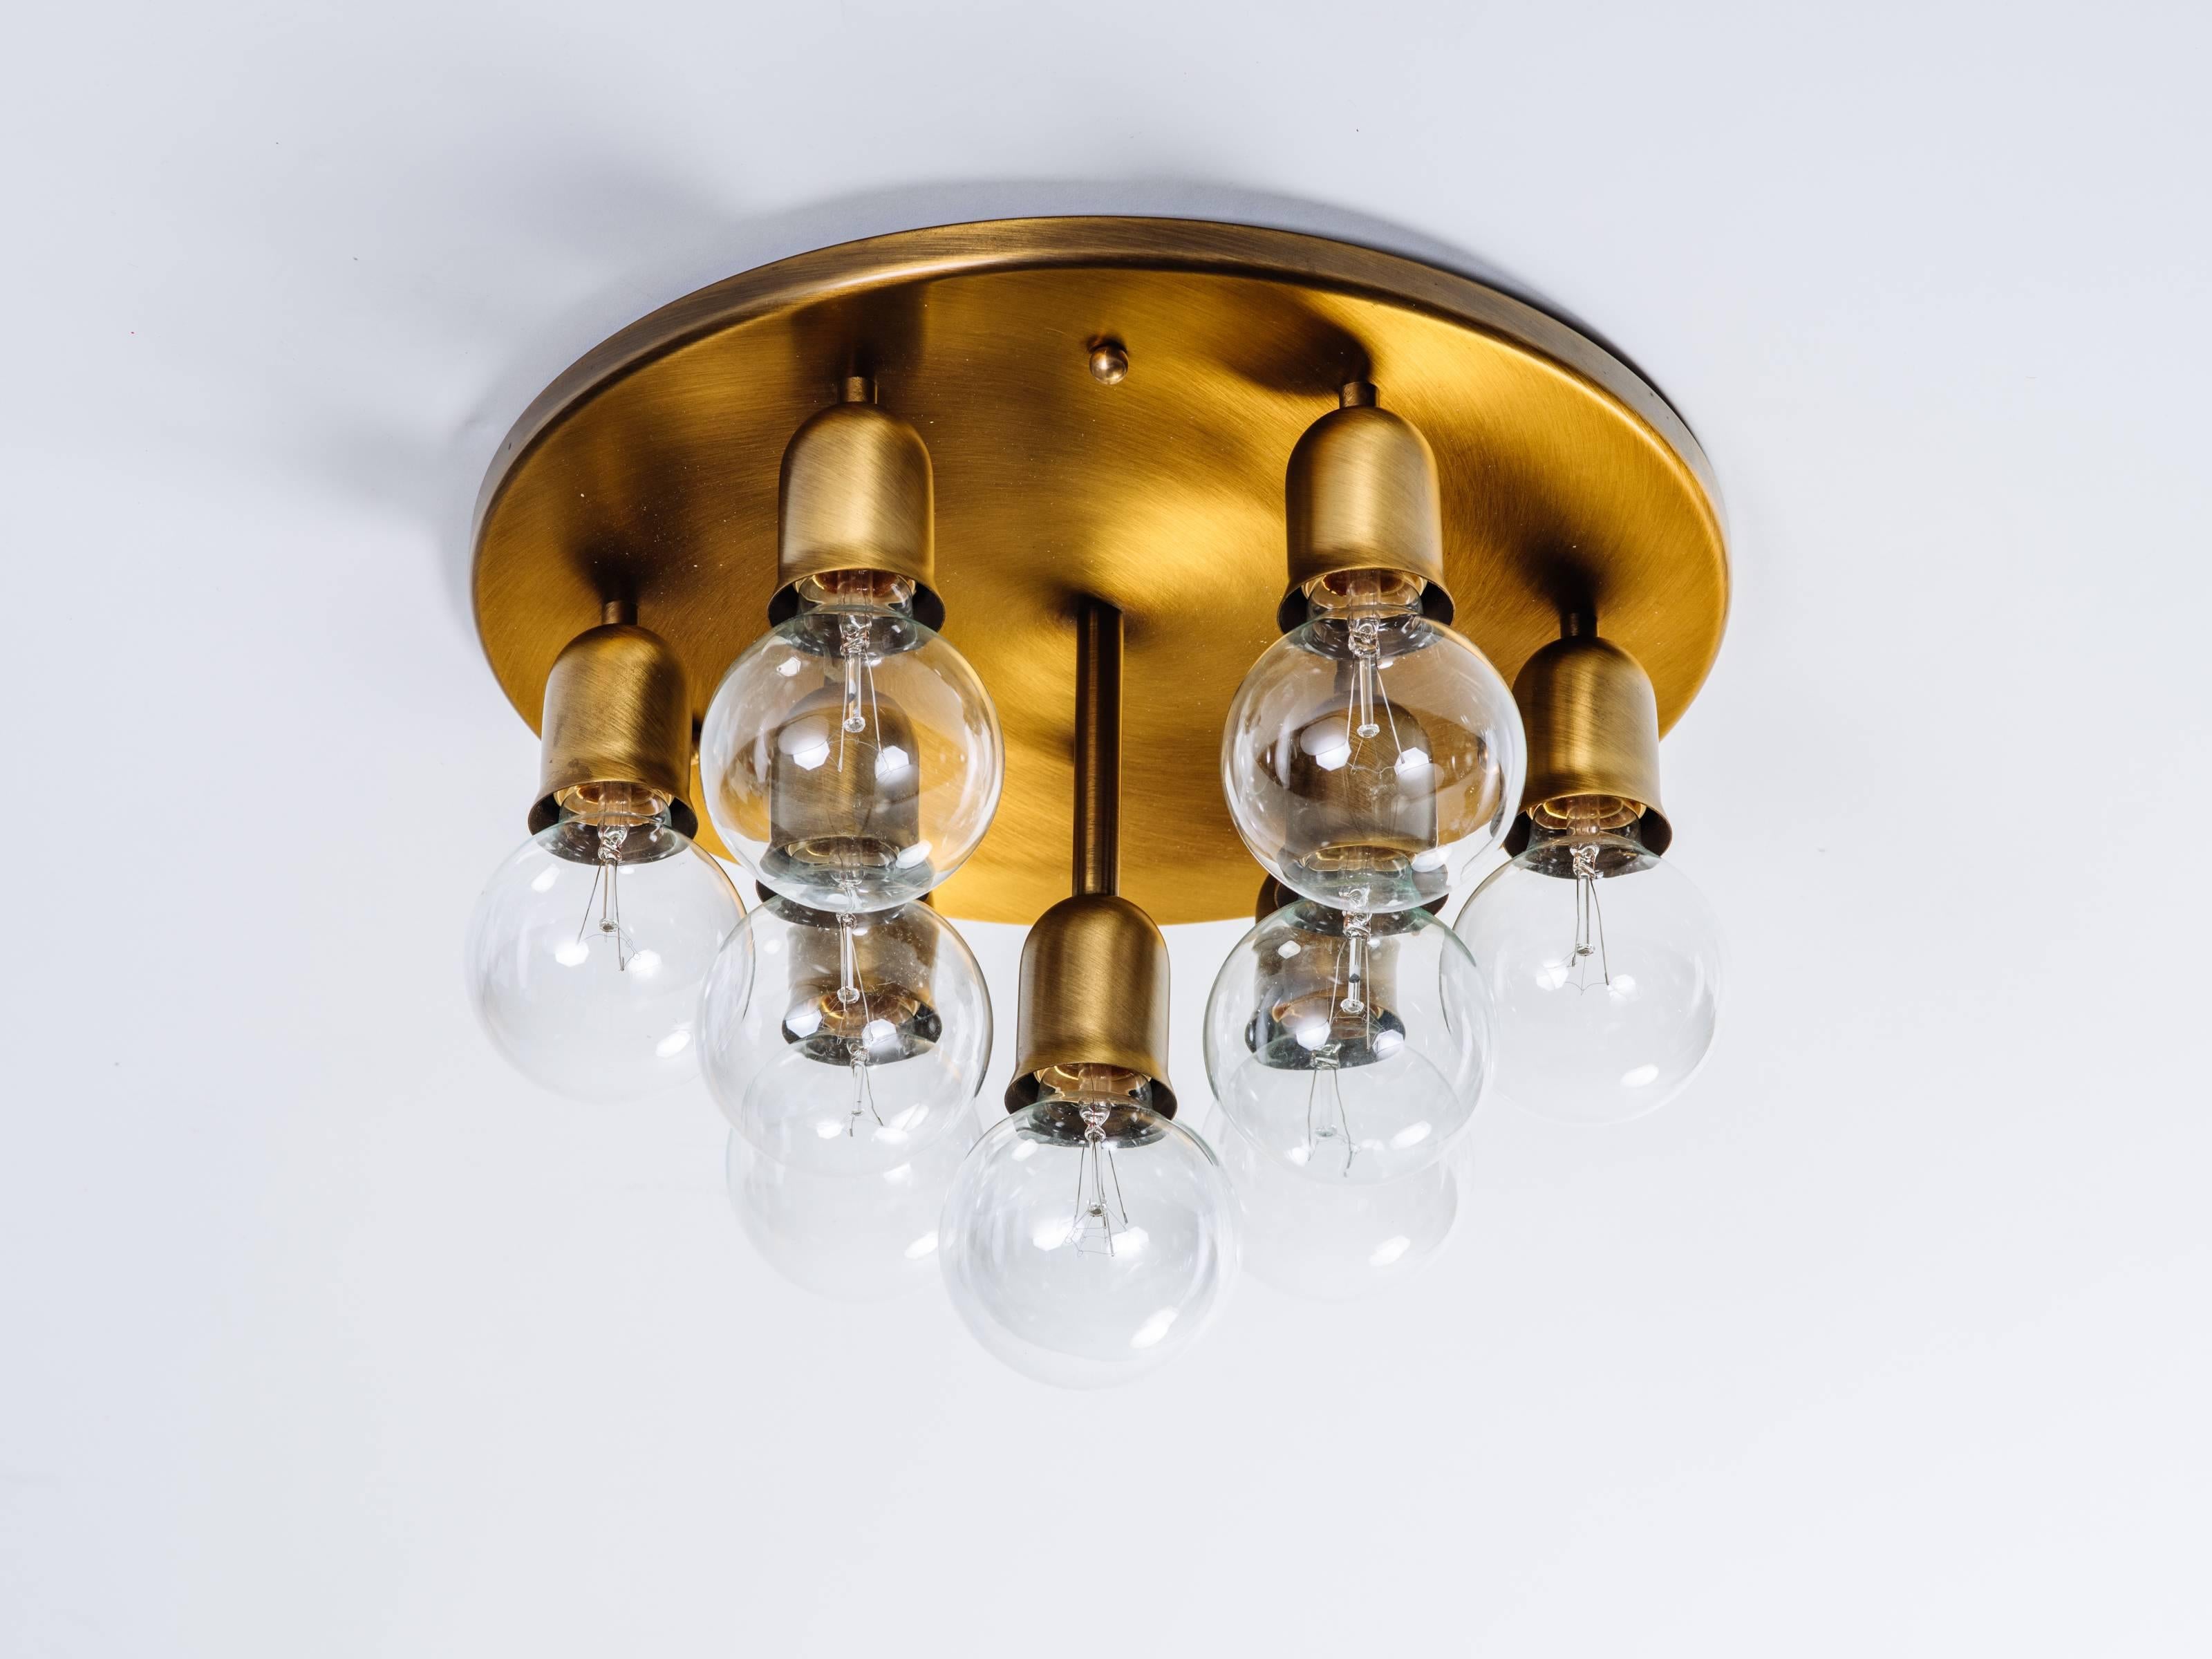 Mid-Century Modern round ceiling light or wall sconce, with sculptural Sputnik design. Fixture has a dark brass or brushed bronze metal finish, and is fitted with ten lights. Light sockets hang at varying heights to create atomic form.